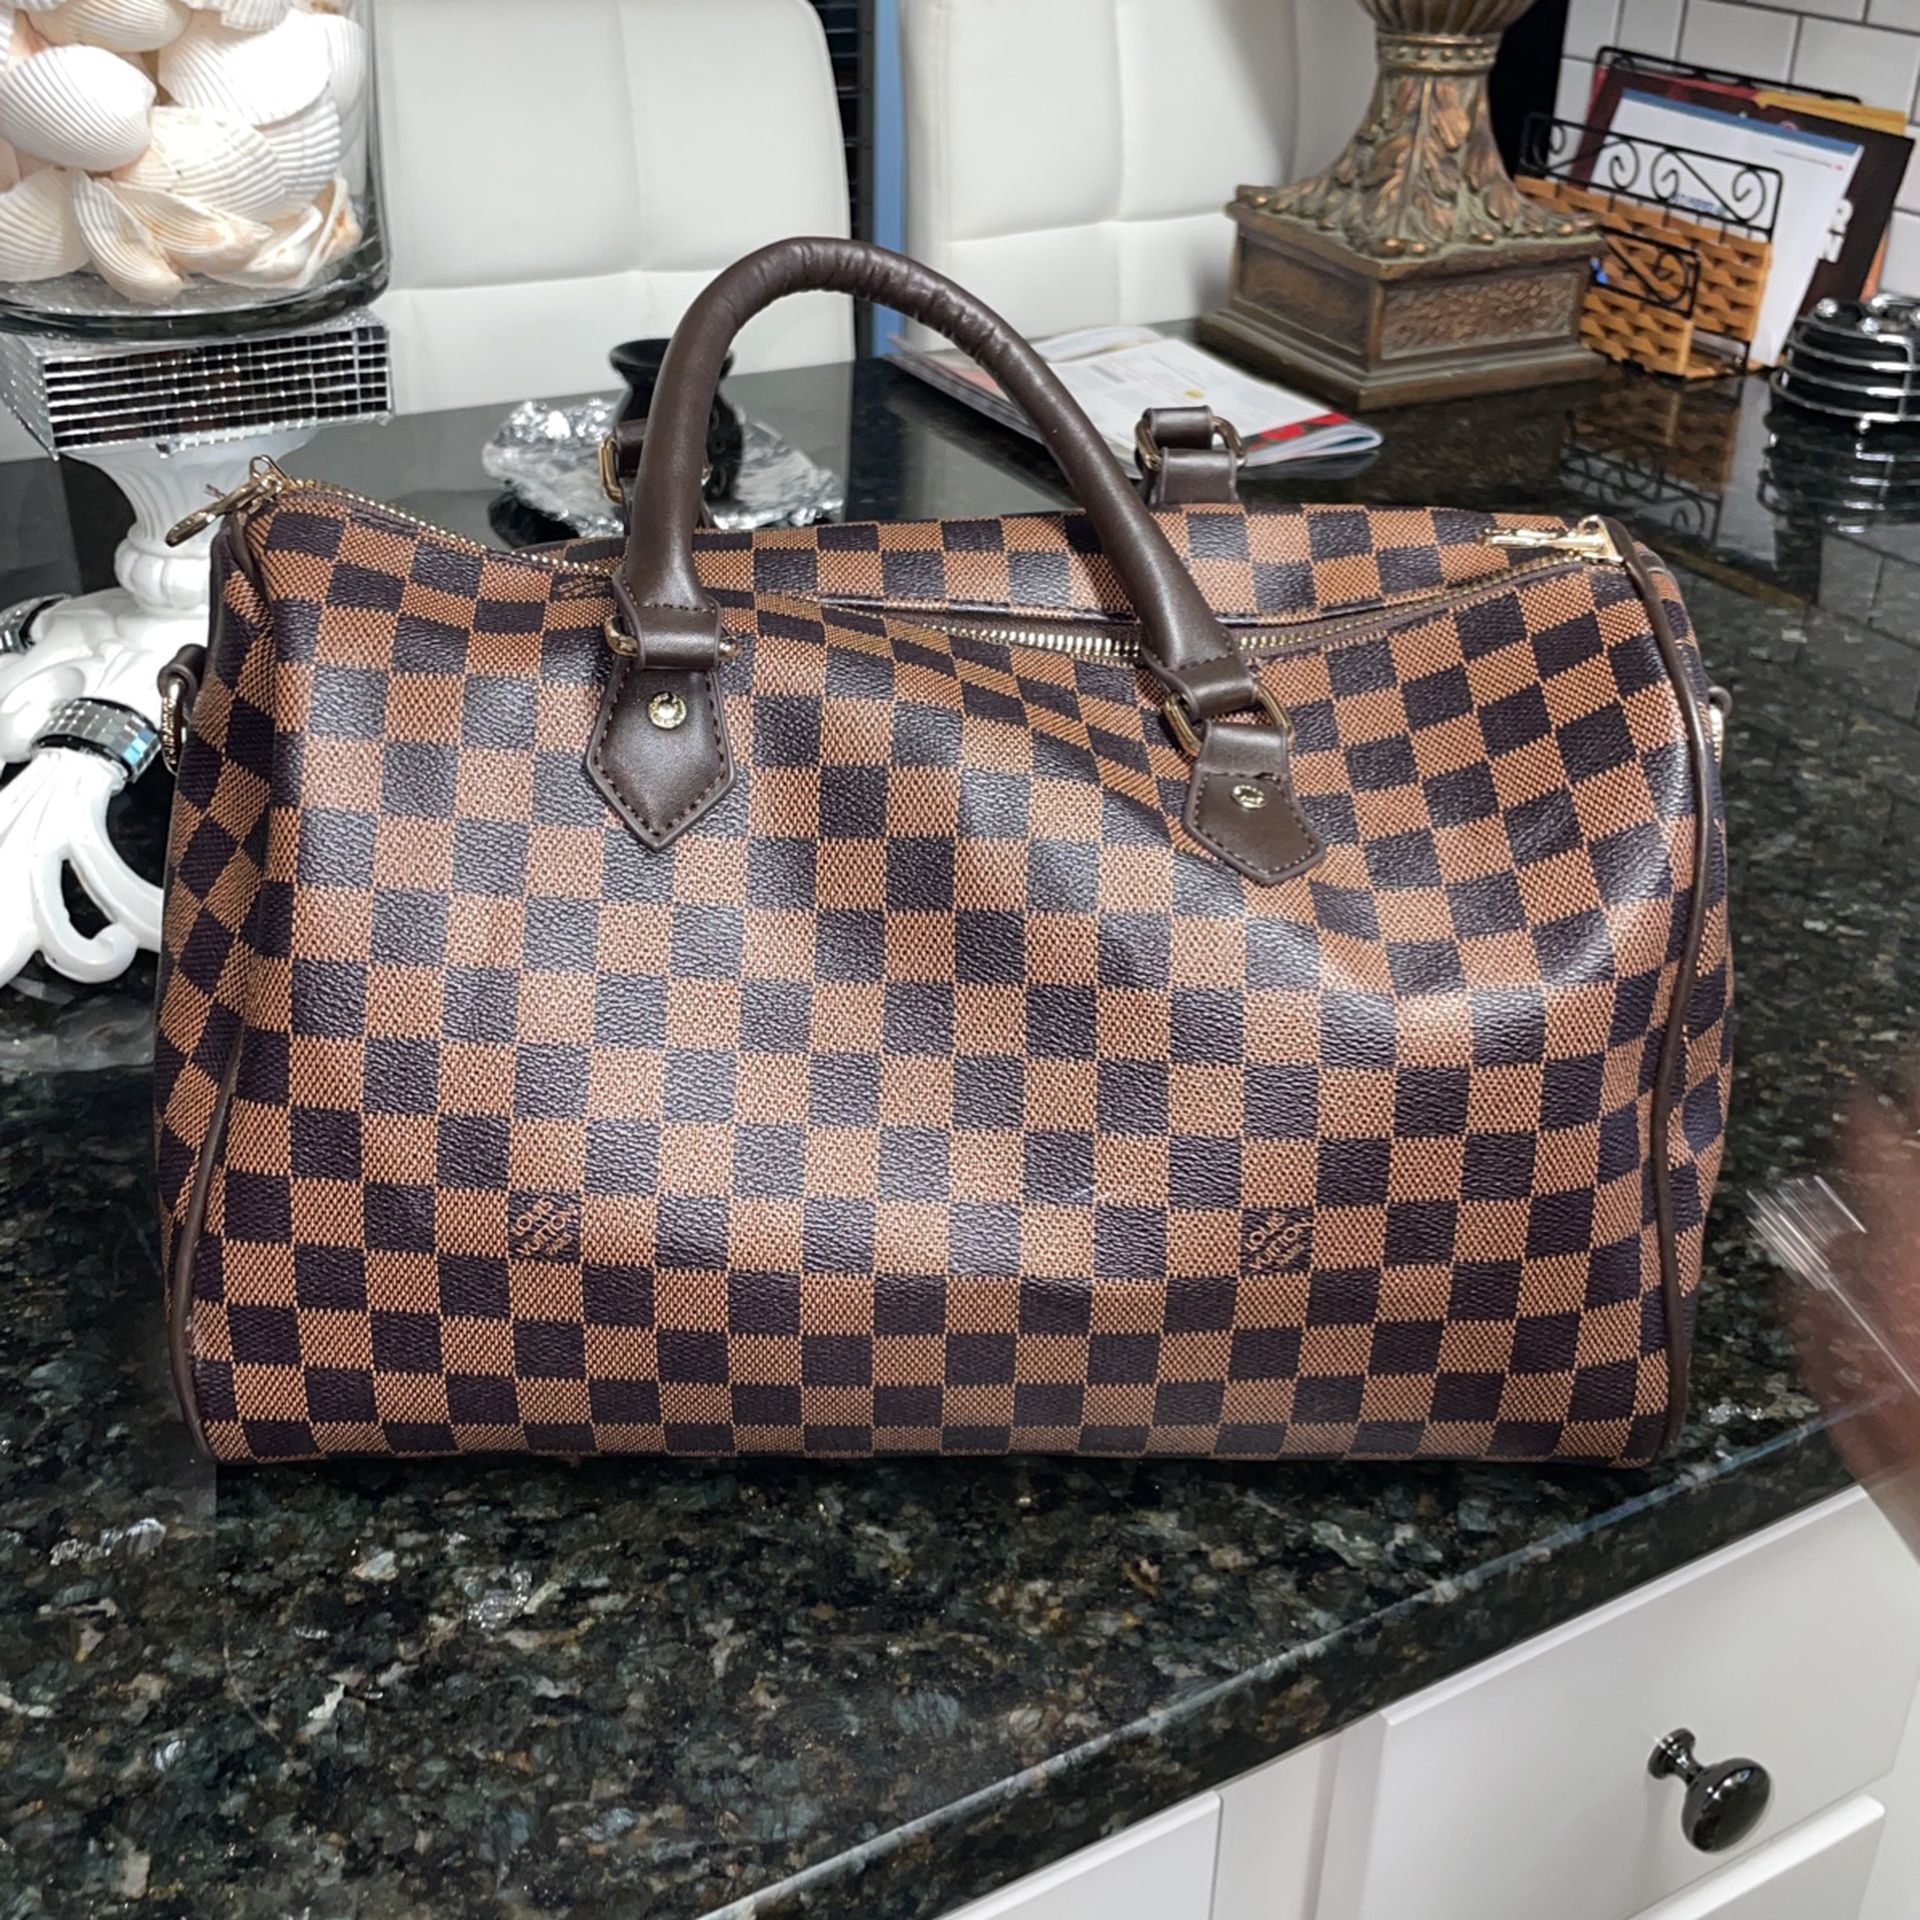 Real Louis Vuitton Items. Taking Best Offer Name A Price